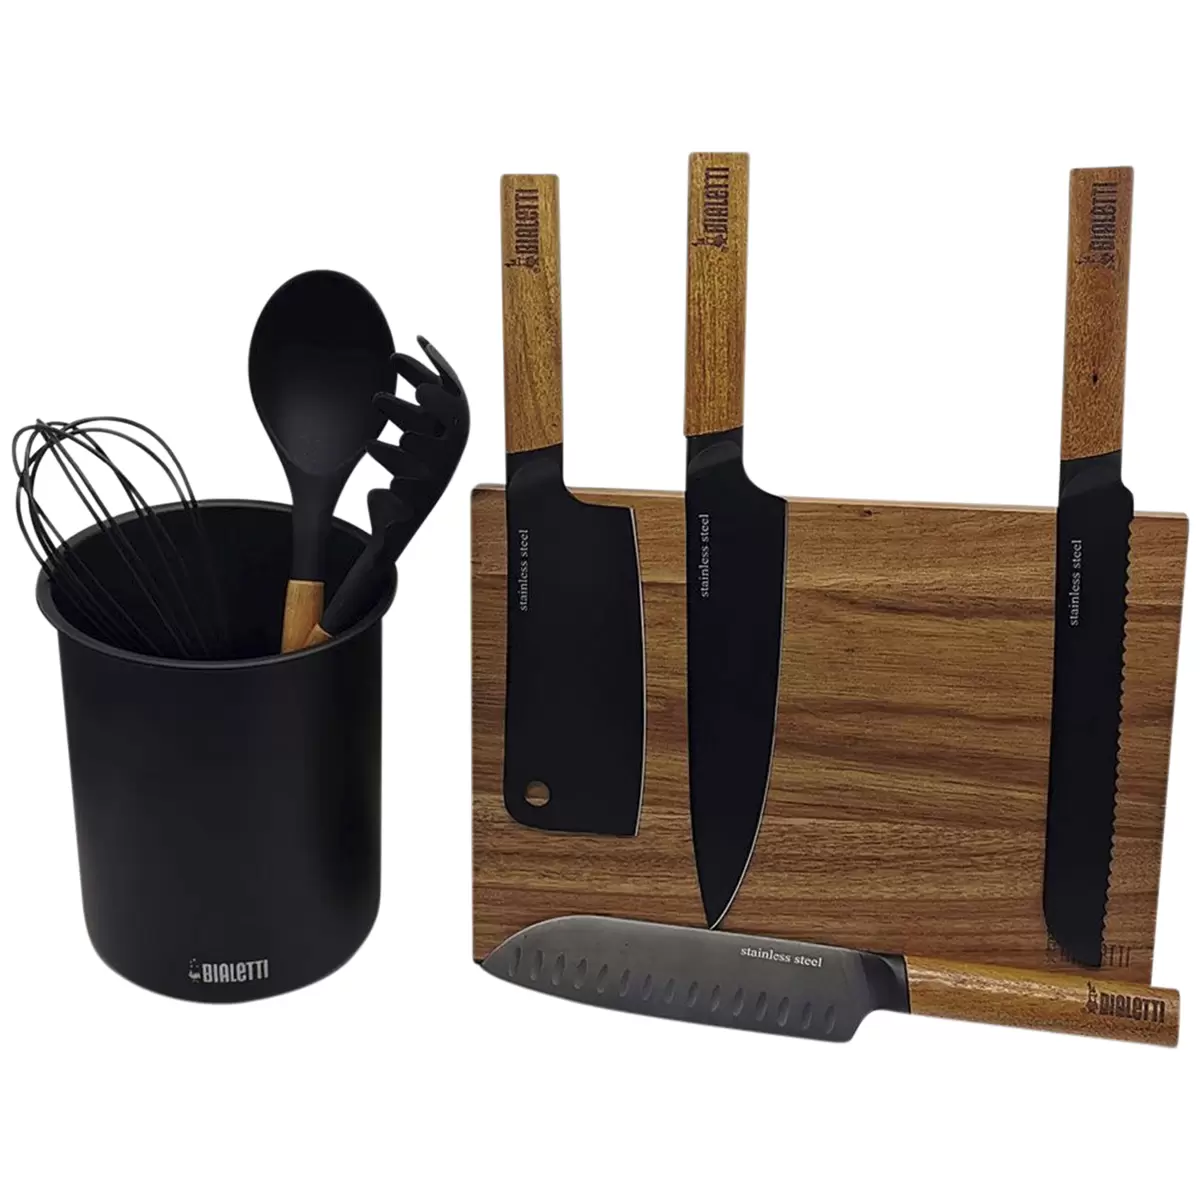 Bialetti St Clare Knife and Utensil Holder Set